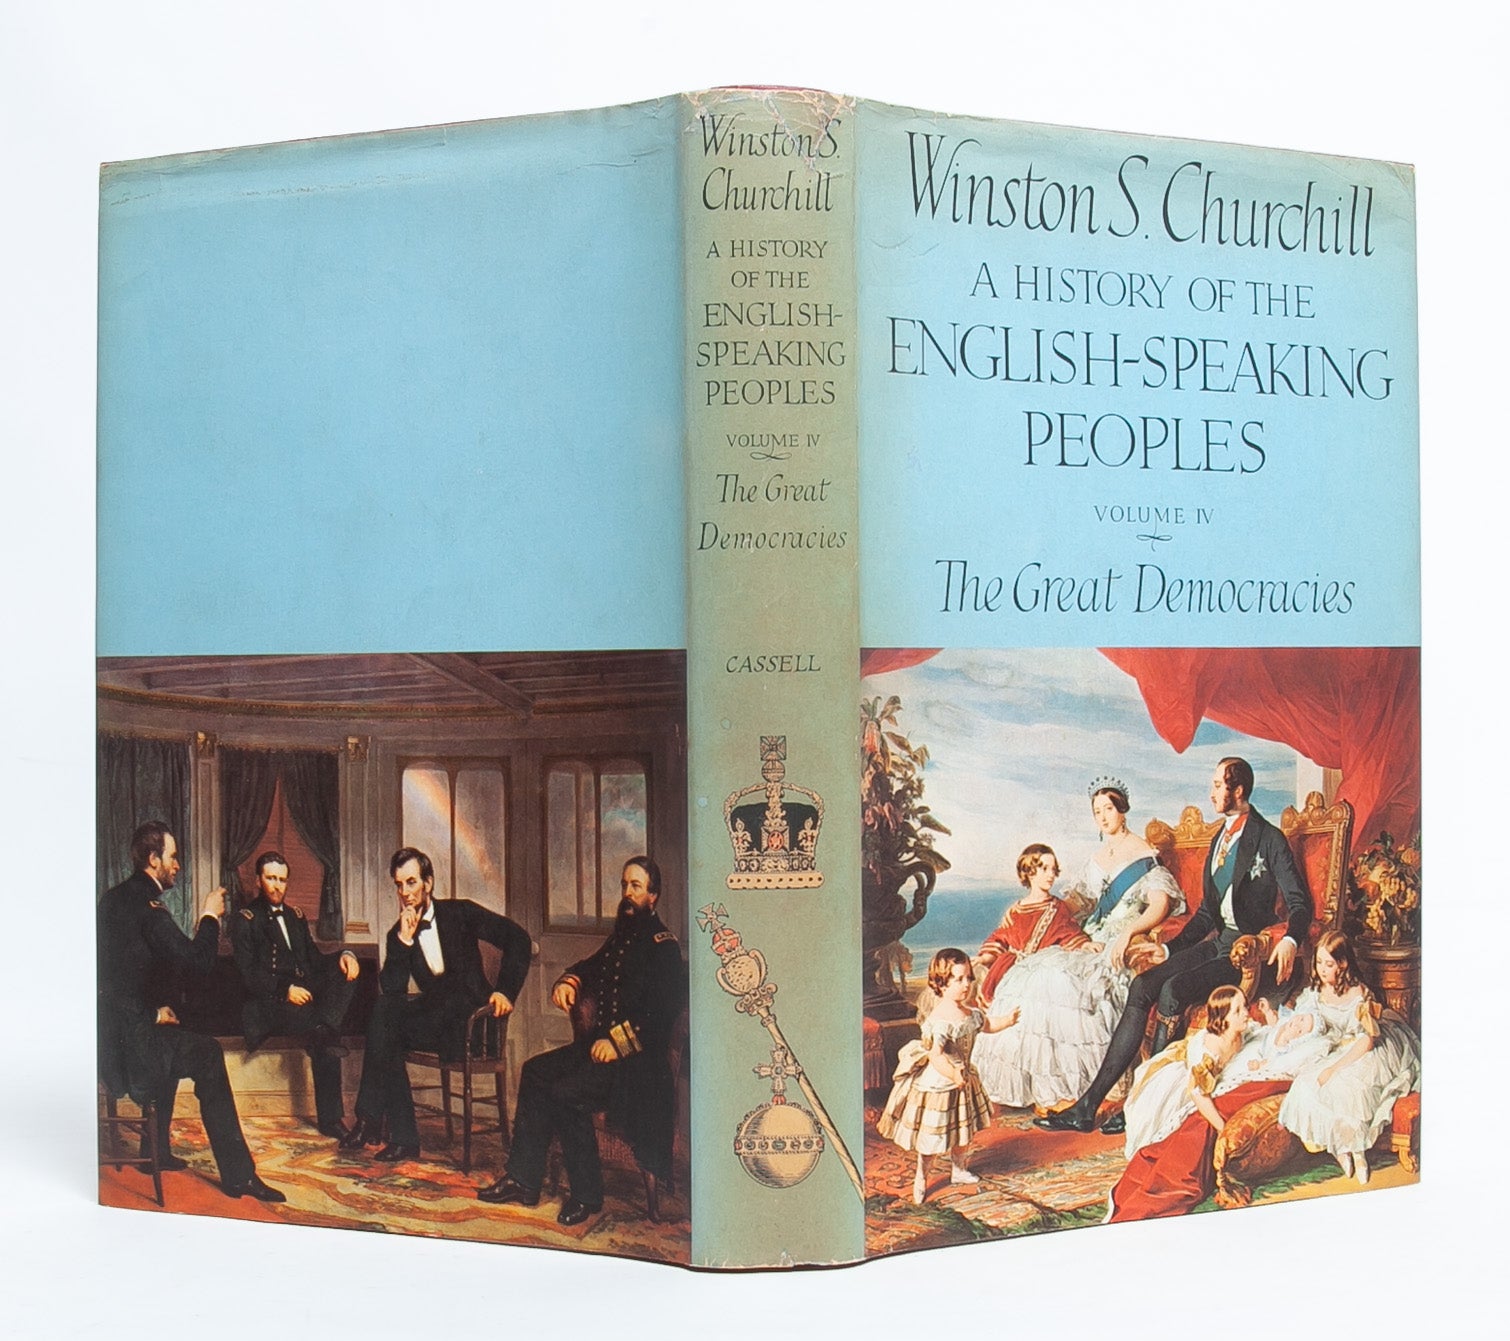 History of the English Speaking Peoples in 4 vols. by Winston Churchill on  Whitmore Rare Books